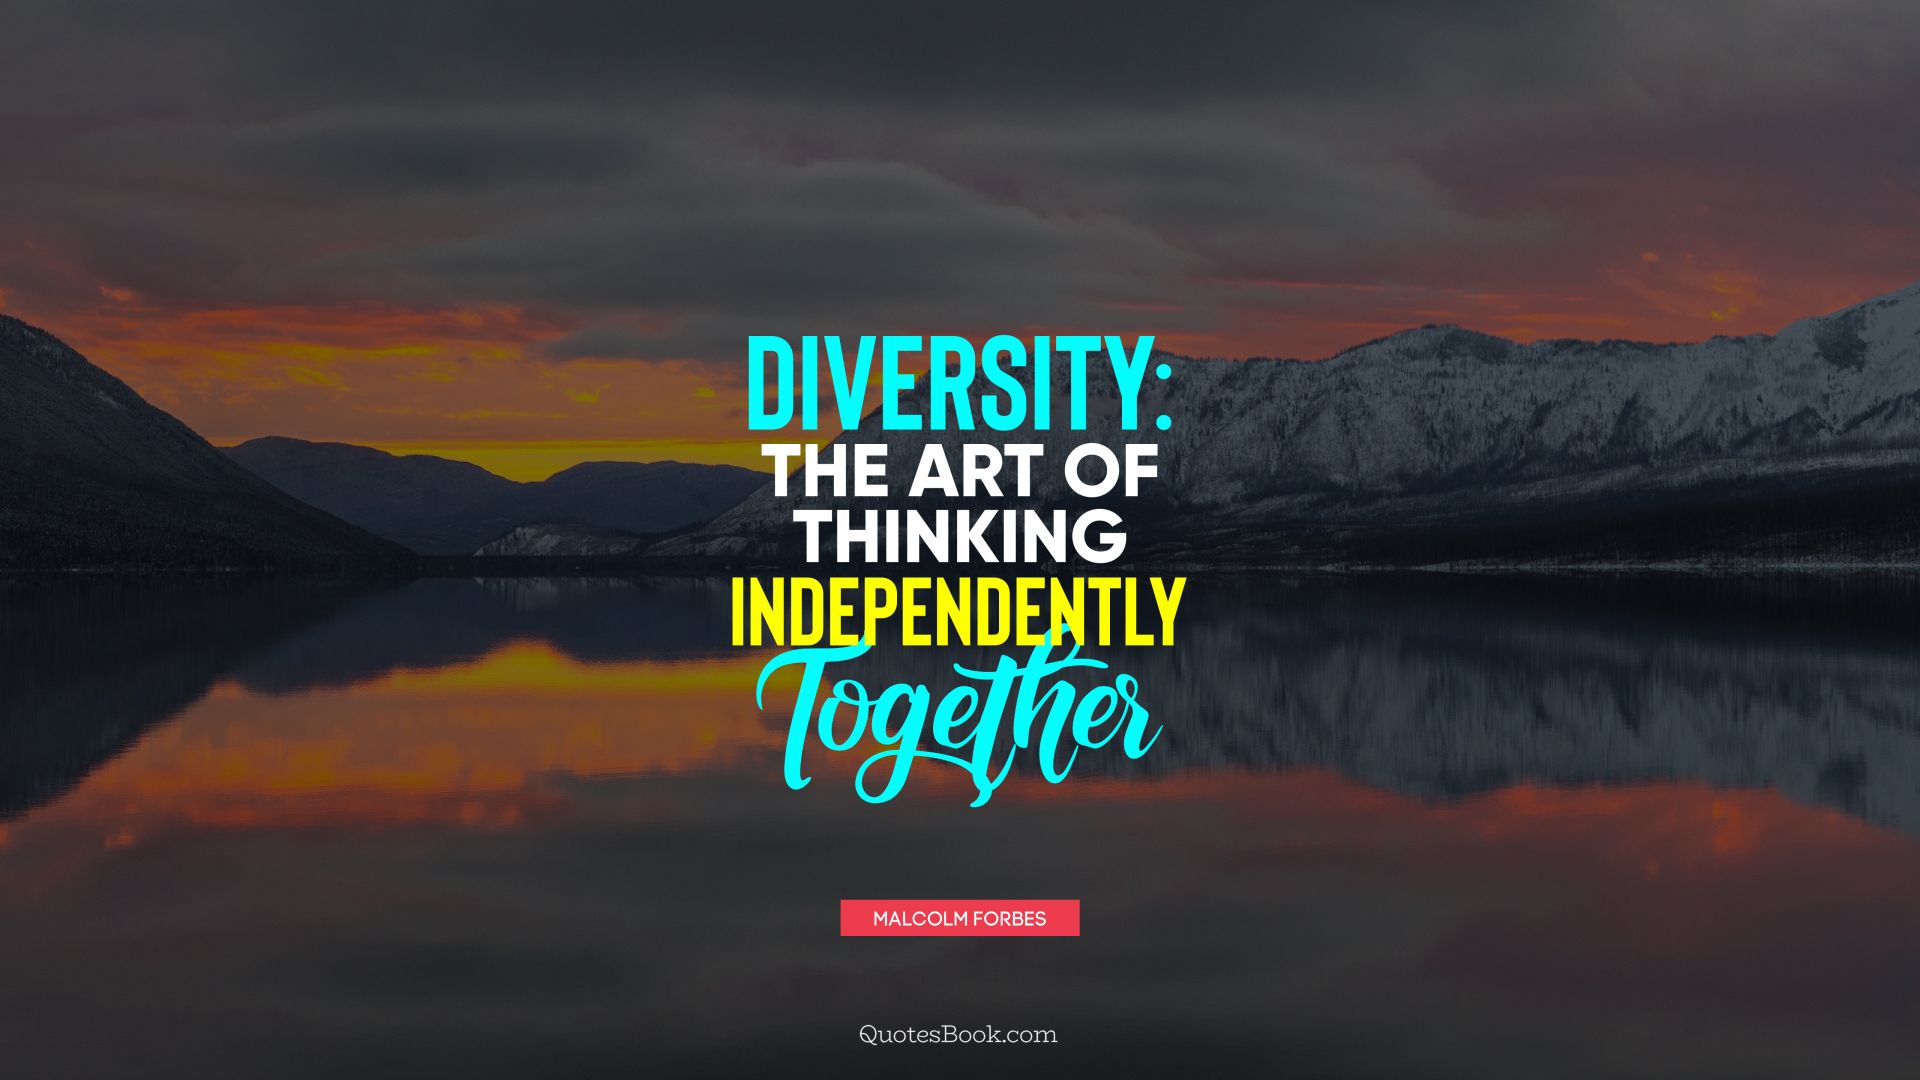 Diversity: the art of thinking independently together. - Quote by Malcolm Forbes